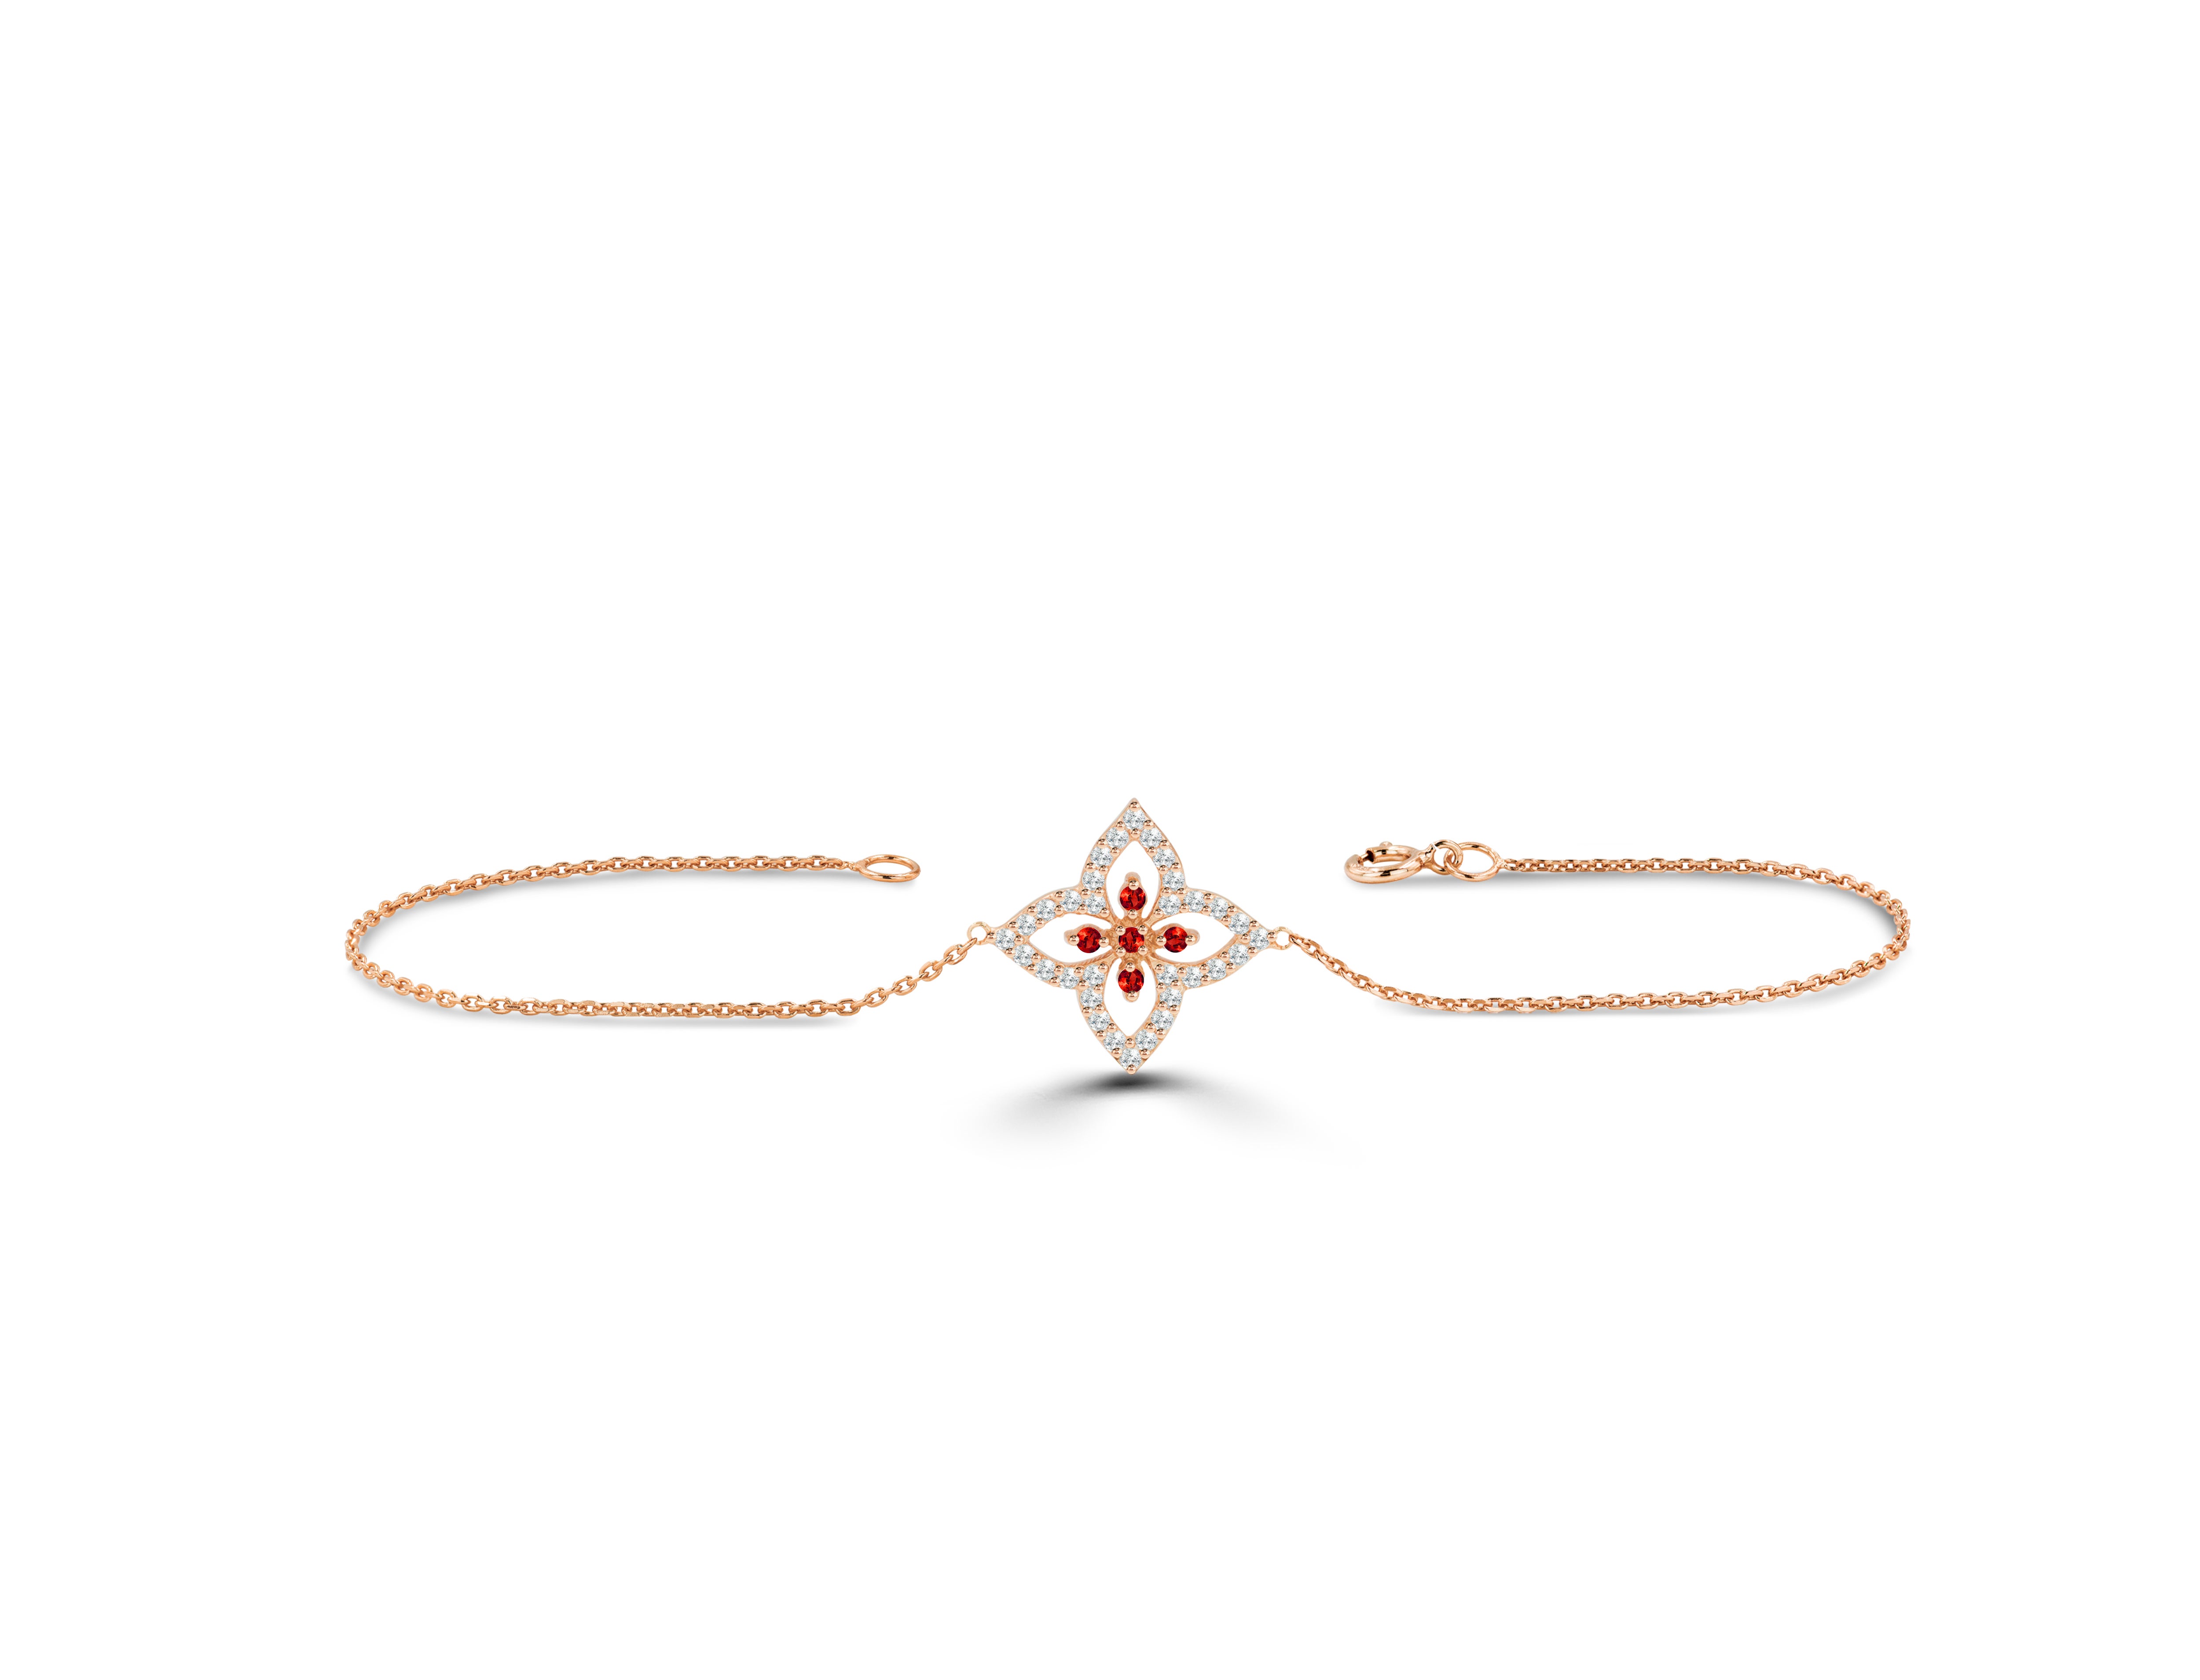 0.25 Carat diamond clover bracelet is the perfect everyday bracelet to wear. You can get customized in the gold color and gold Karat of your choice, it can also be customized in the precious stone of your choice - Emerald, Ruby, or Sapphire. Our